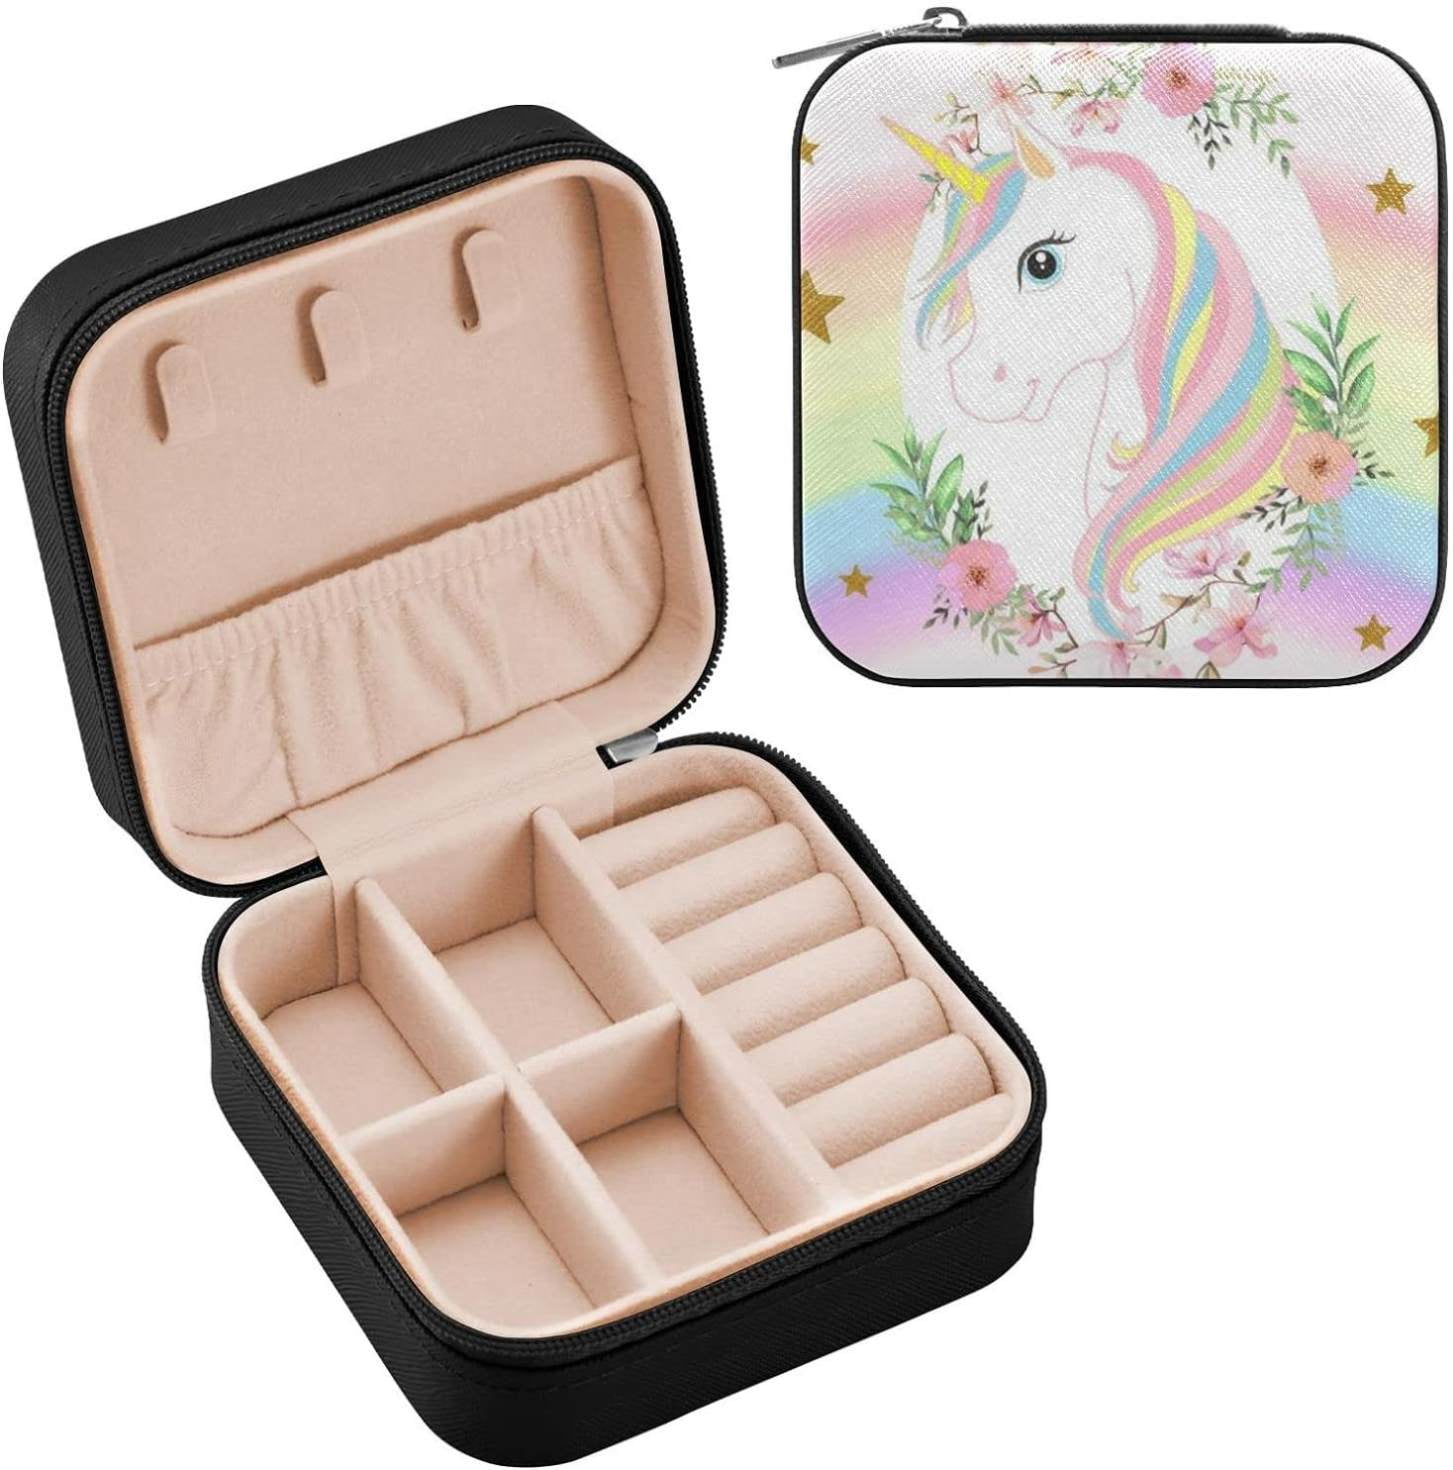 SYJBUH Travel Jewelry Box, PU Leather Small Jewelry Organizer for Women  Girls, Double Layer Portable Mini Travel Case Display Storage Holder Boxes  for Stud Earrings, Rings, Necklaces, Bracelets : Amazon.in: Jewellery